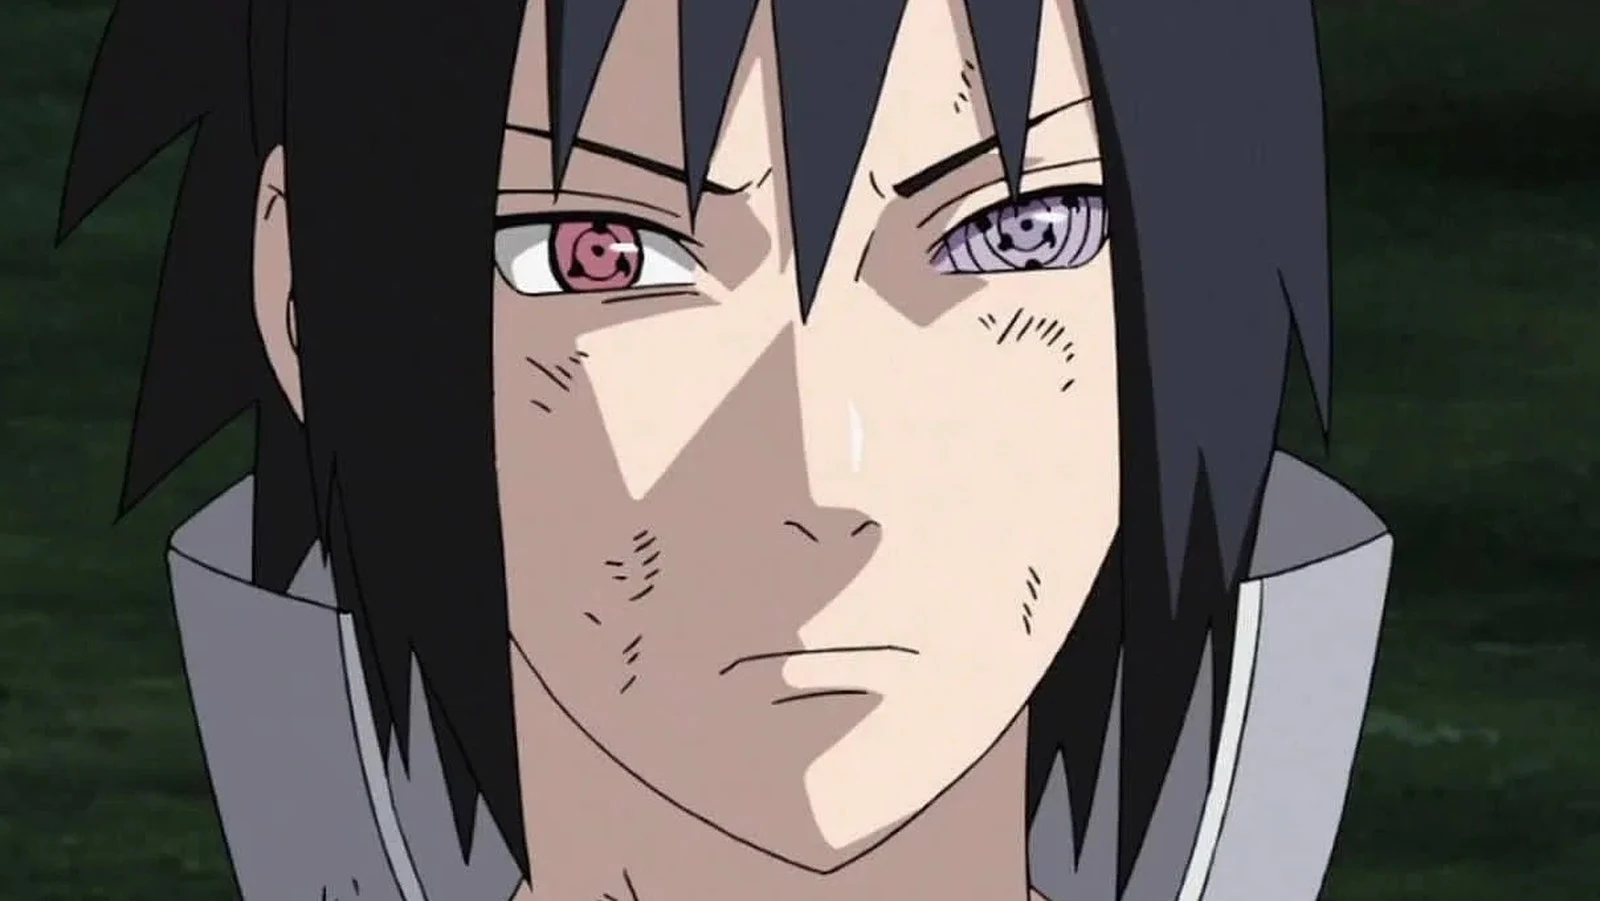 Sasuke began to experience depression after learning that his family had been killed. 